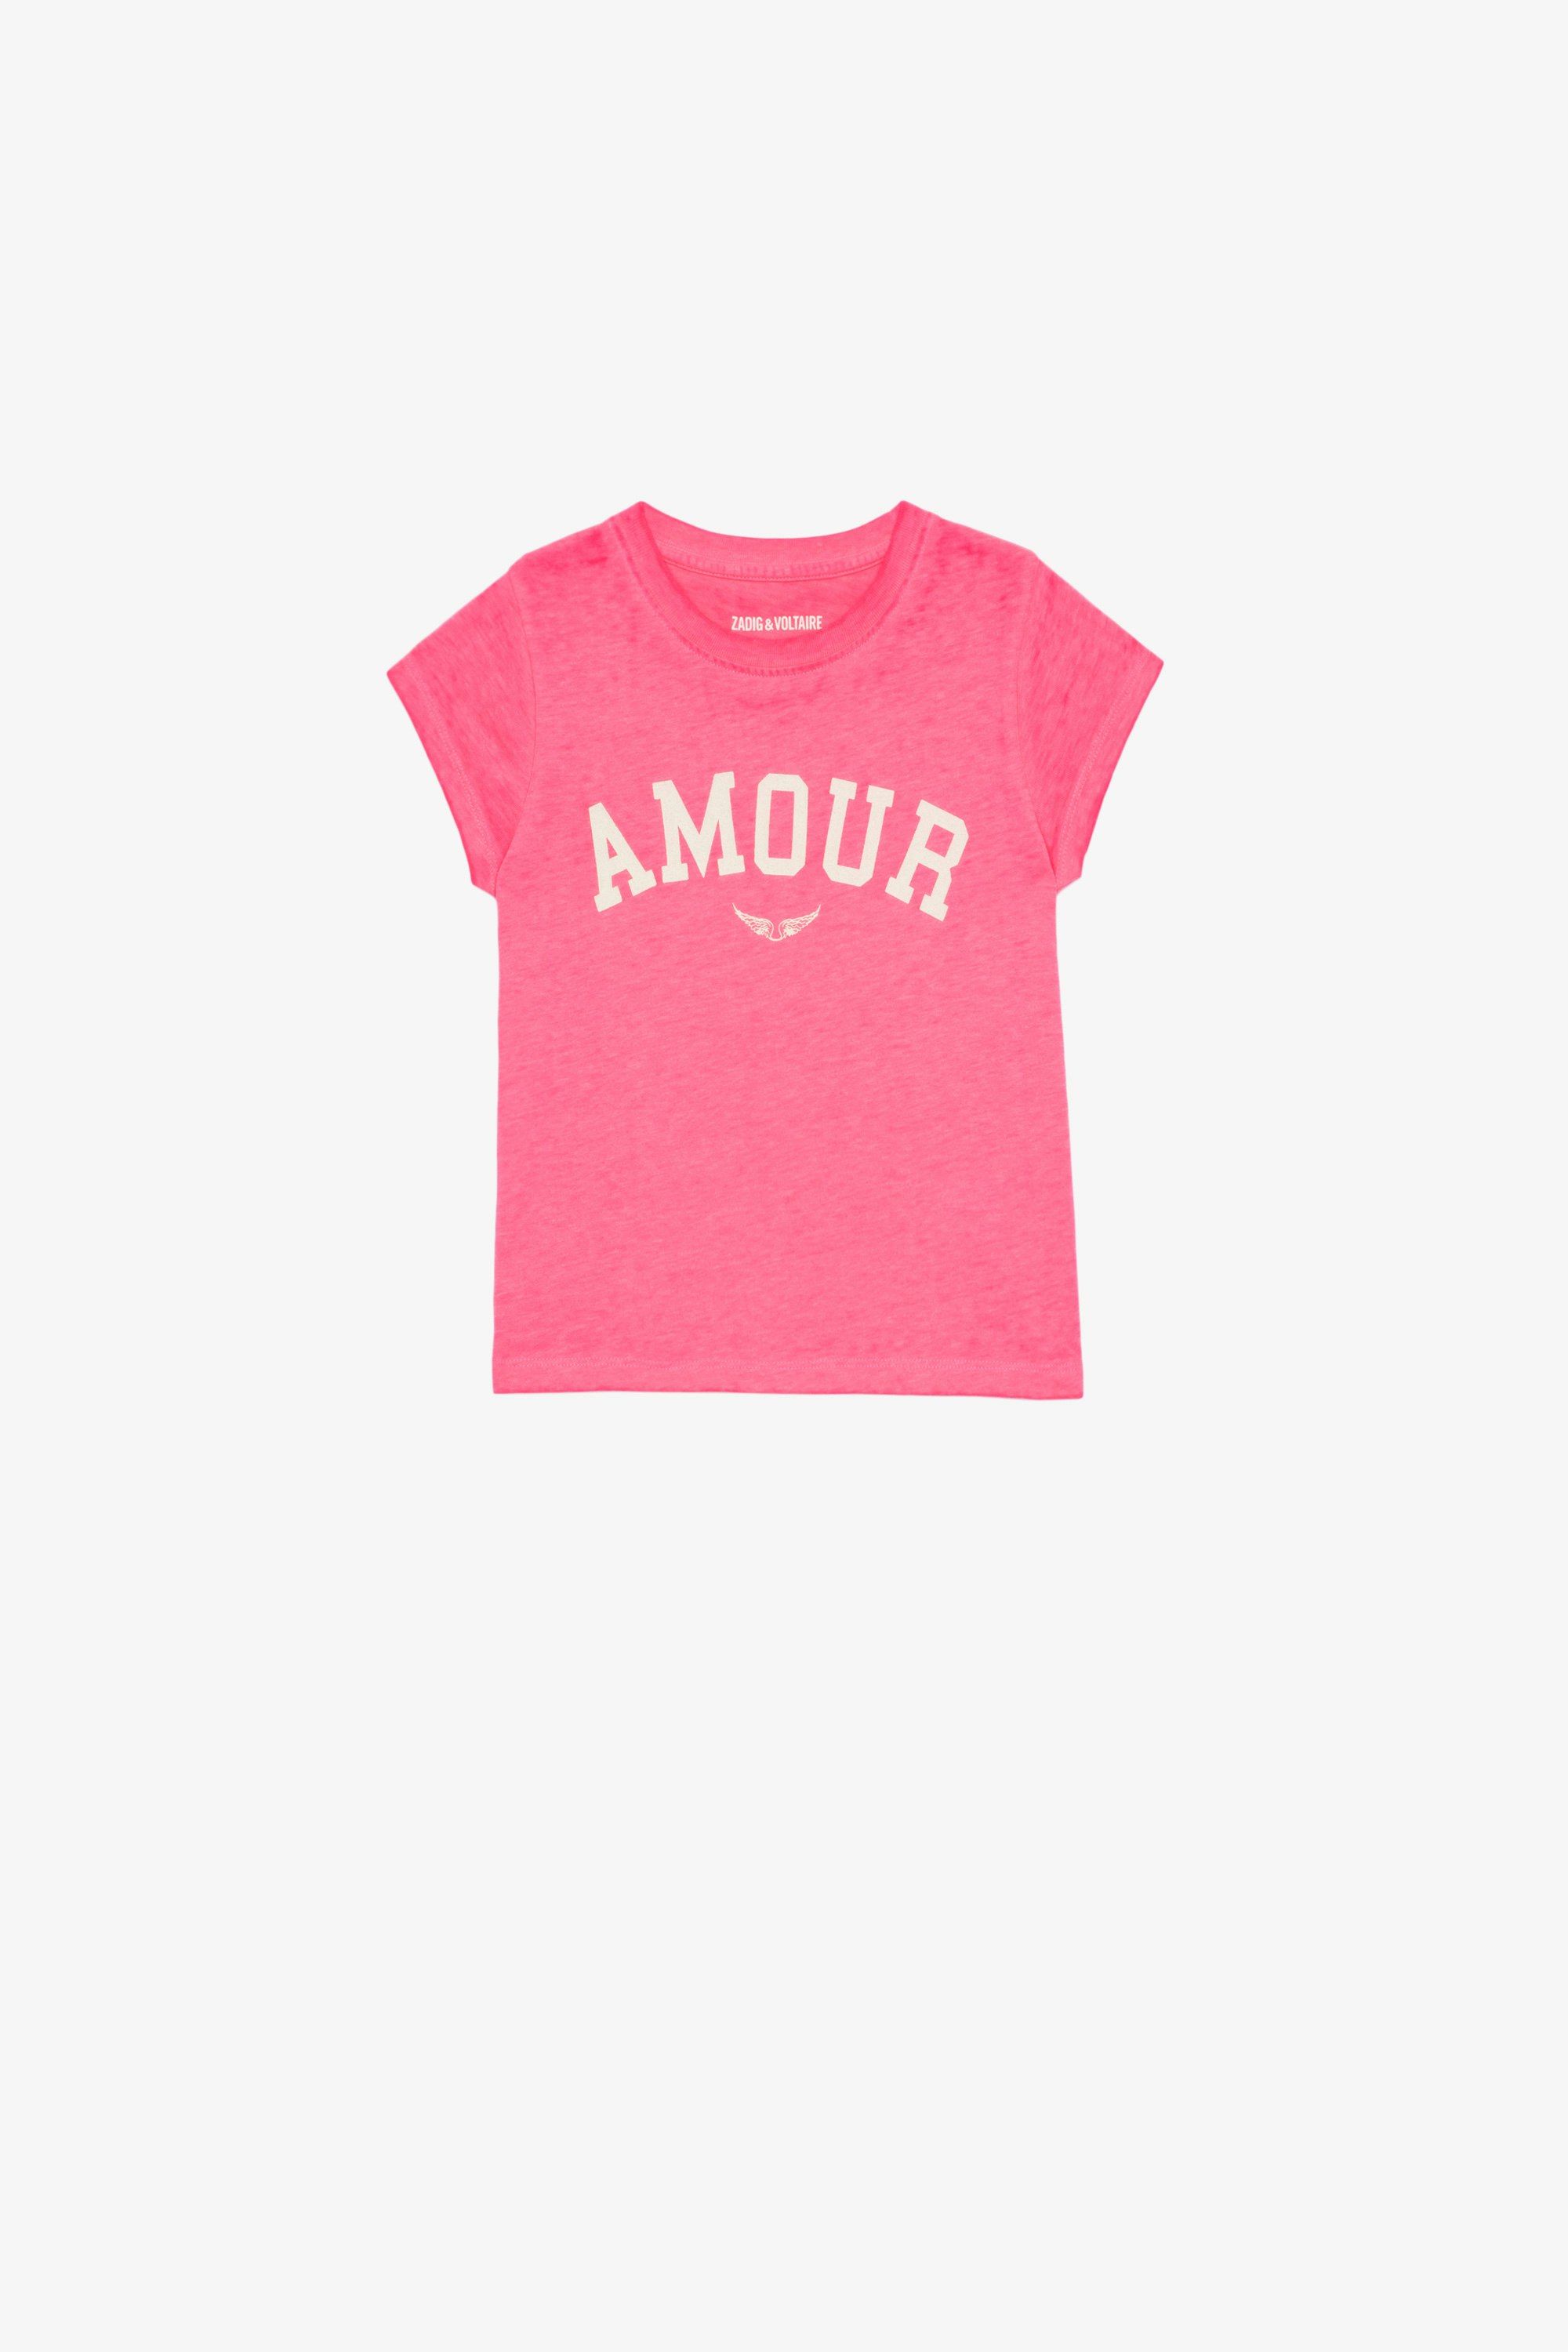 Niels Kids' T-Shirt Kids’ T-shirt in pink cotton jersey with “Amour” print